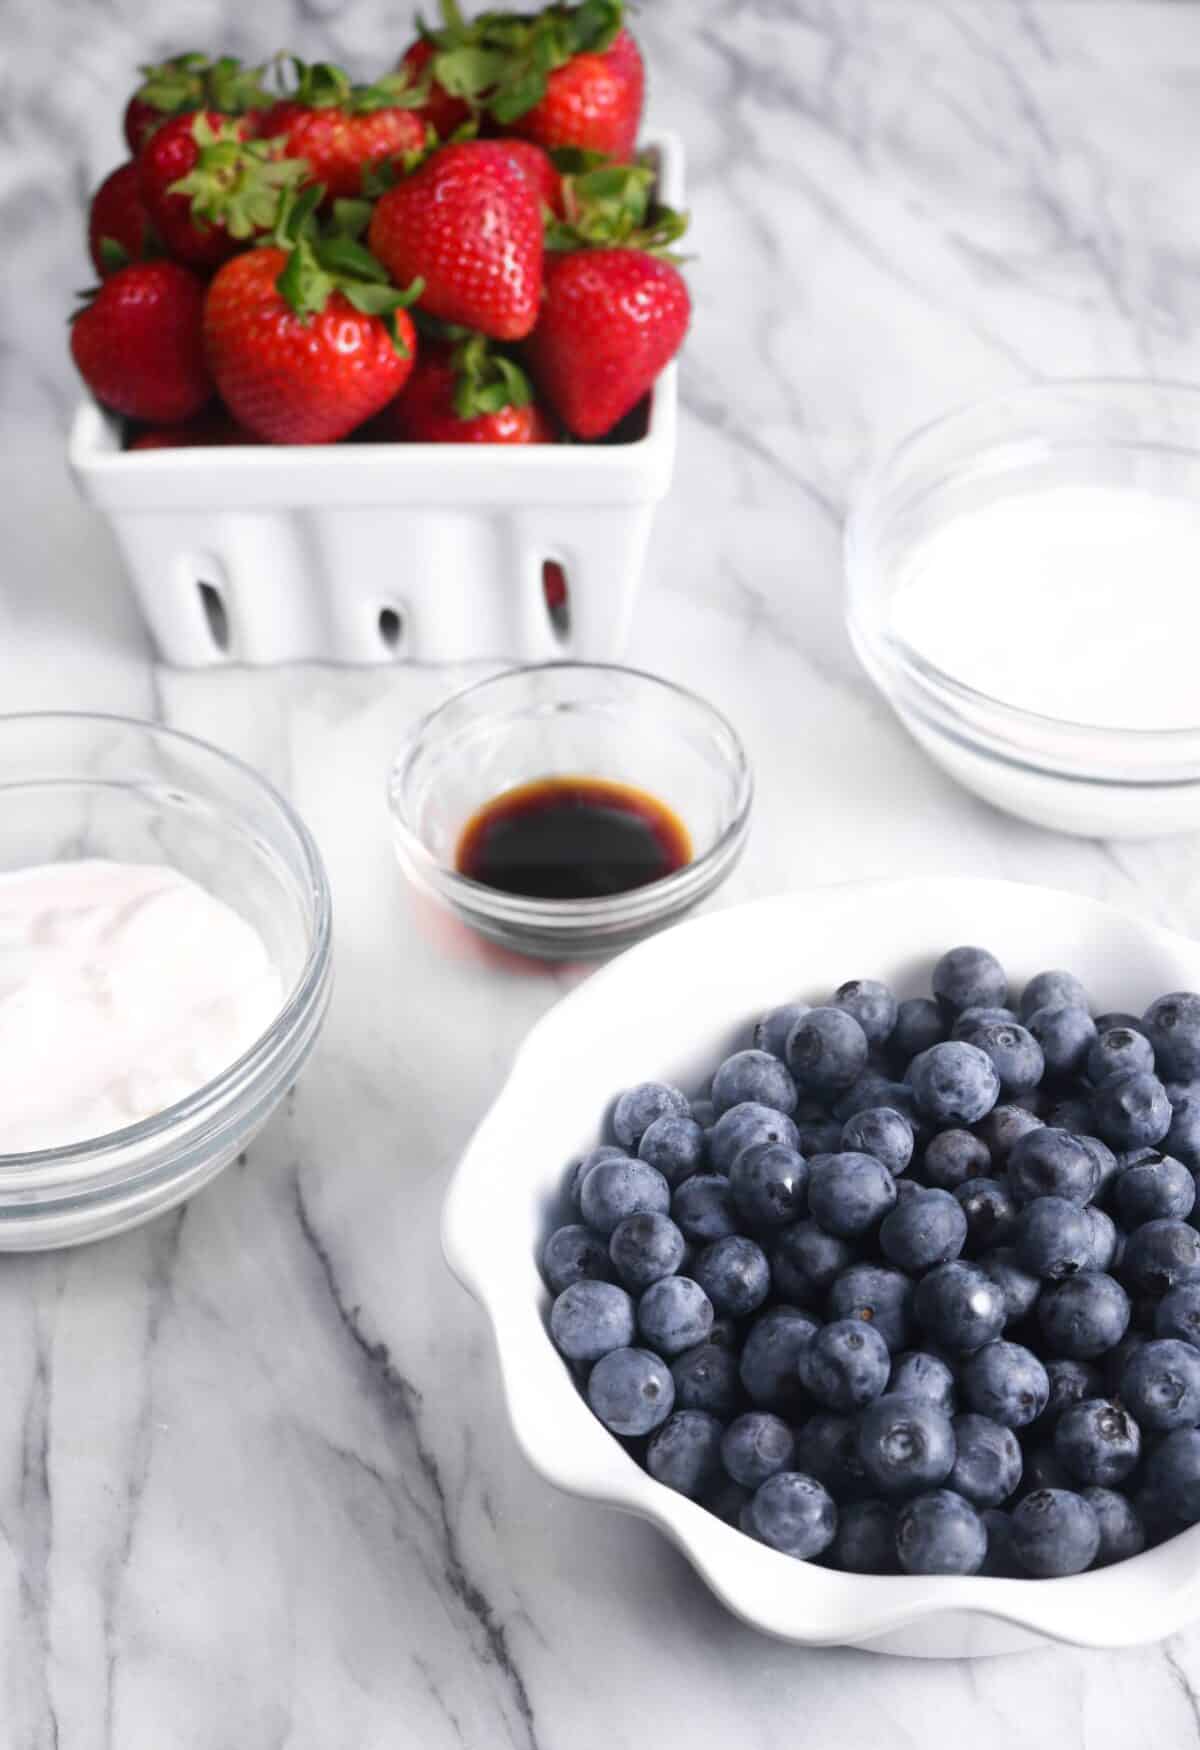 a bowl of blueberries, a basket of strawberries, and three bowls with heavy cream, vanilla, and sour cream on a marble board